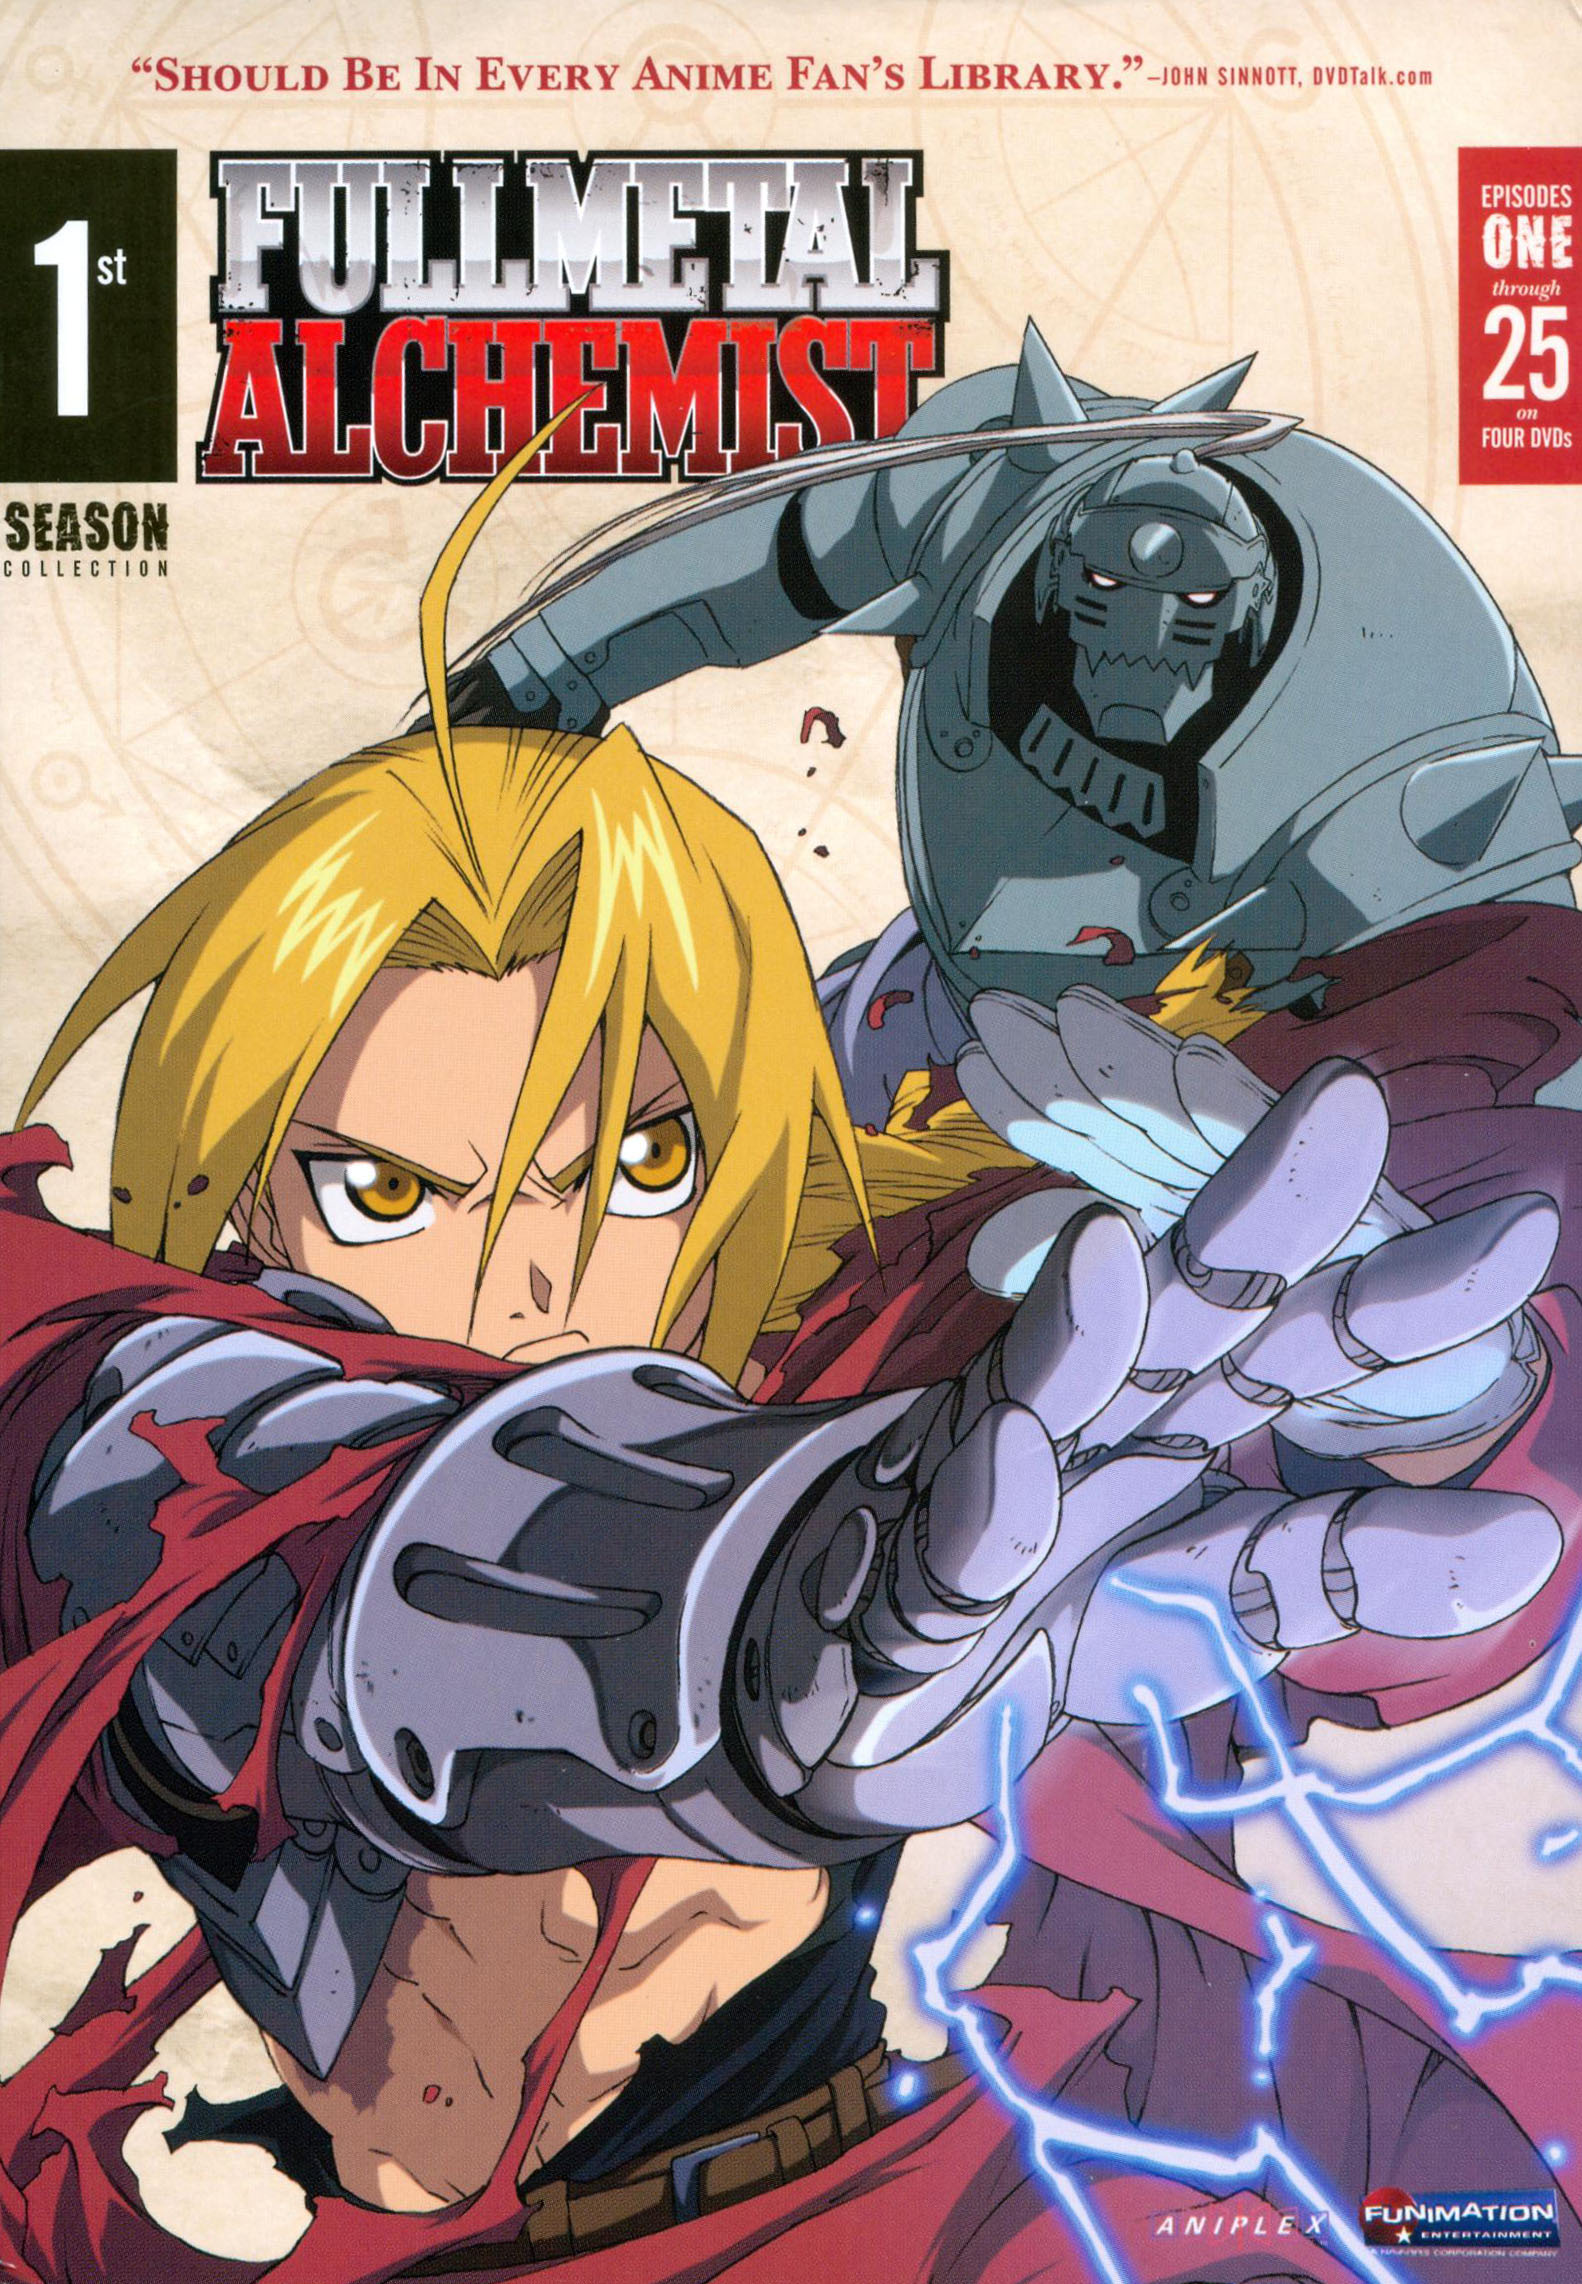 Pre-owned - Full Metal Alchemist Volume 1 The Curse (2004) DVD -- (Episodes  1-4) 